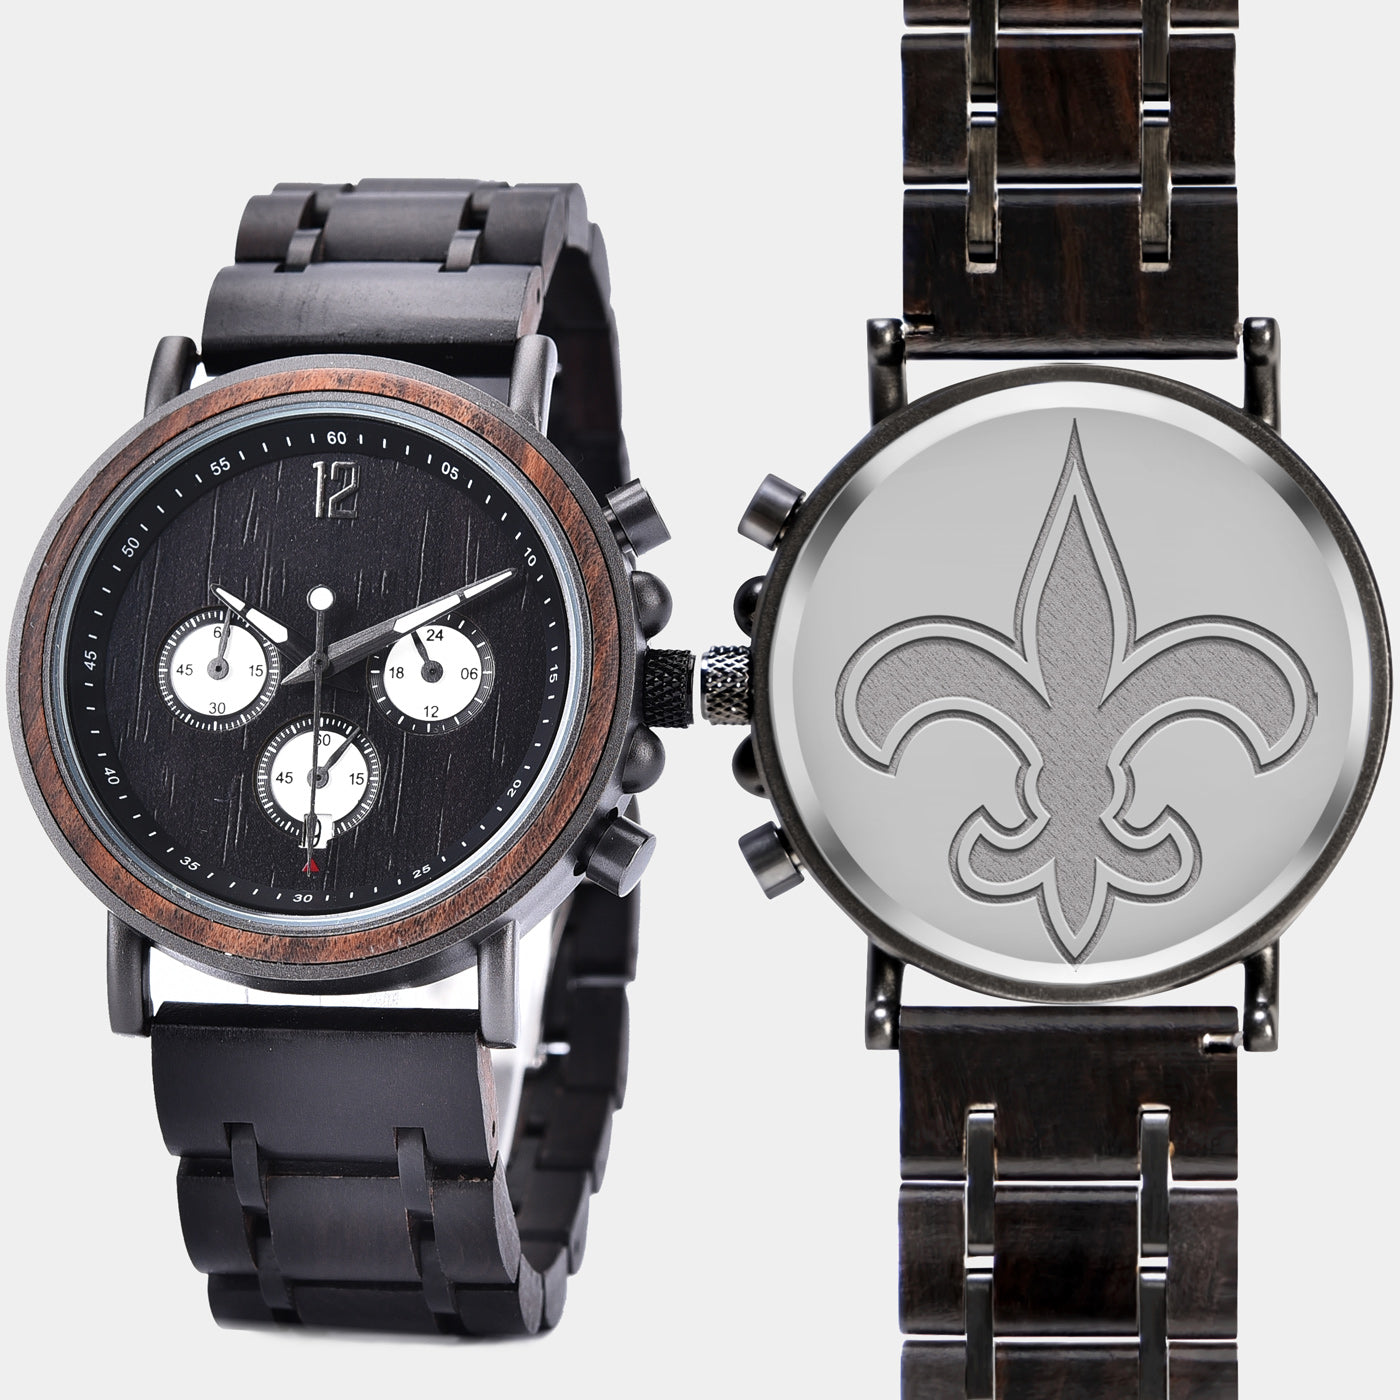 new orleans saints gifts for him